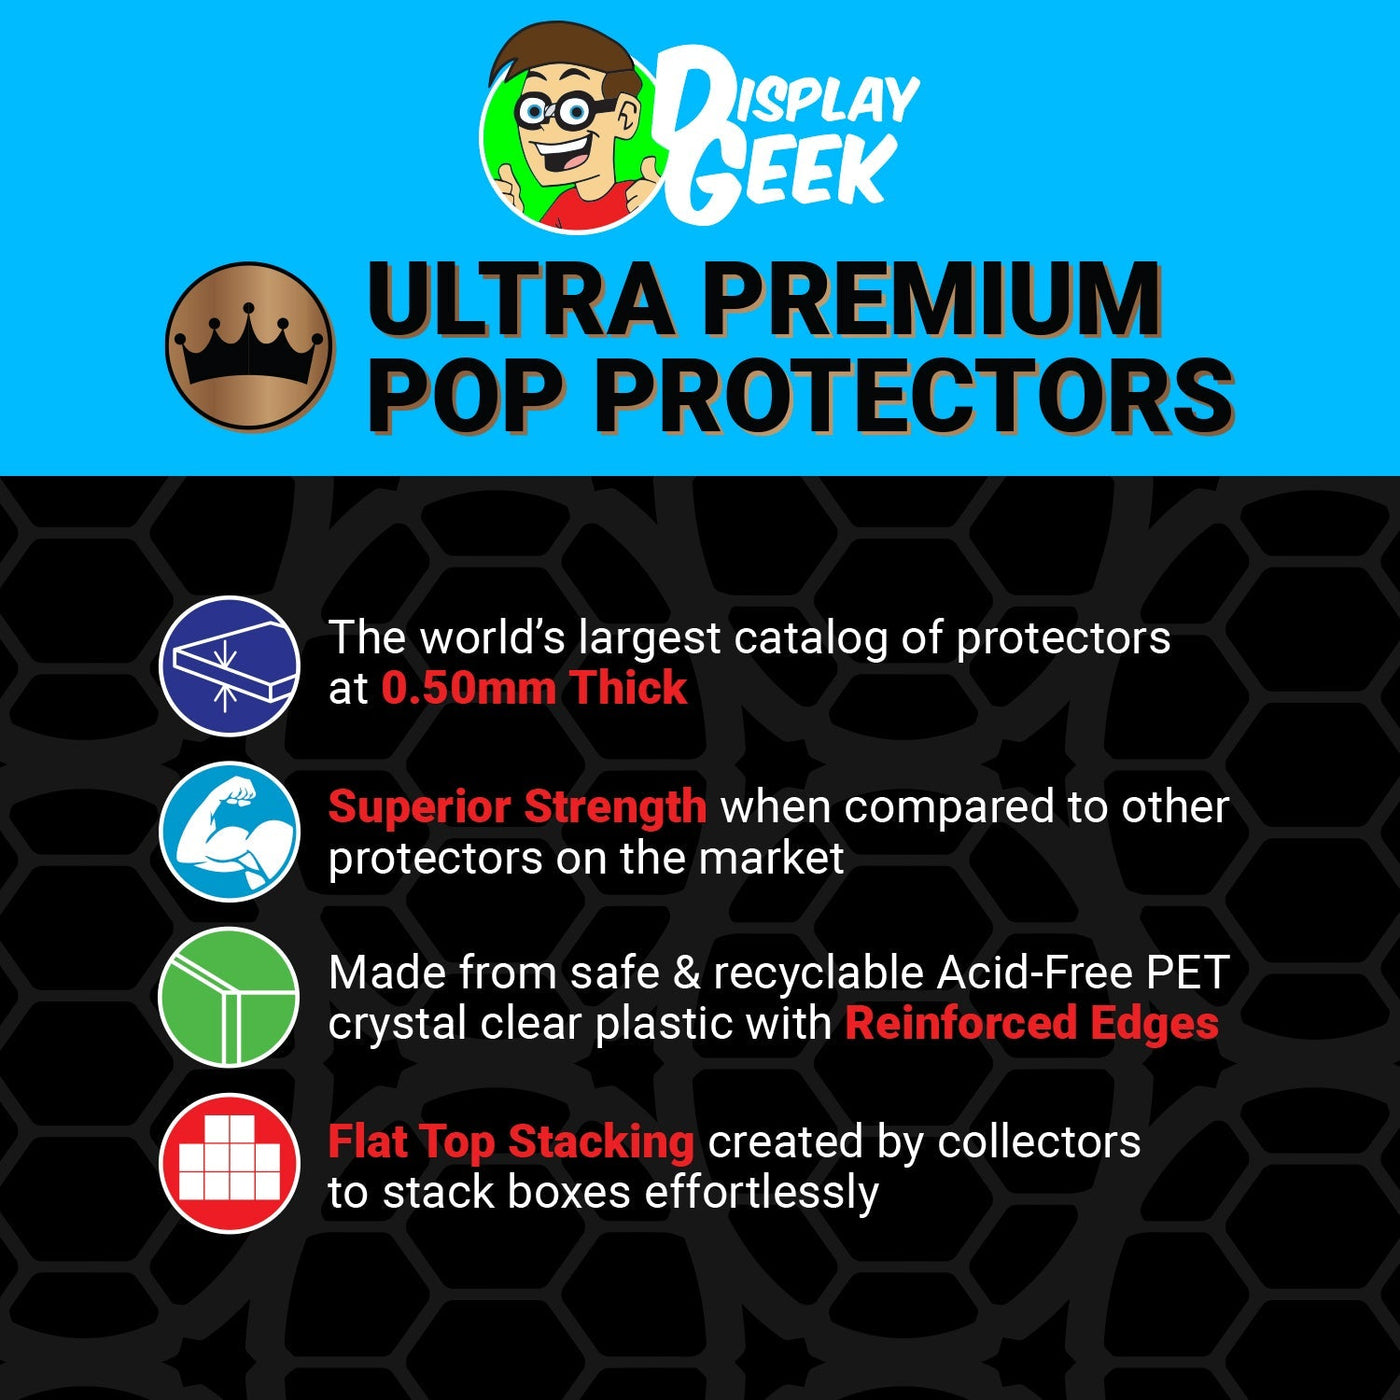 Pop Protector for 9 inch Giant Freddy Funko as Batman Black Hair SDCC Funko Pop on The Protector Guide App by Display Geek